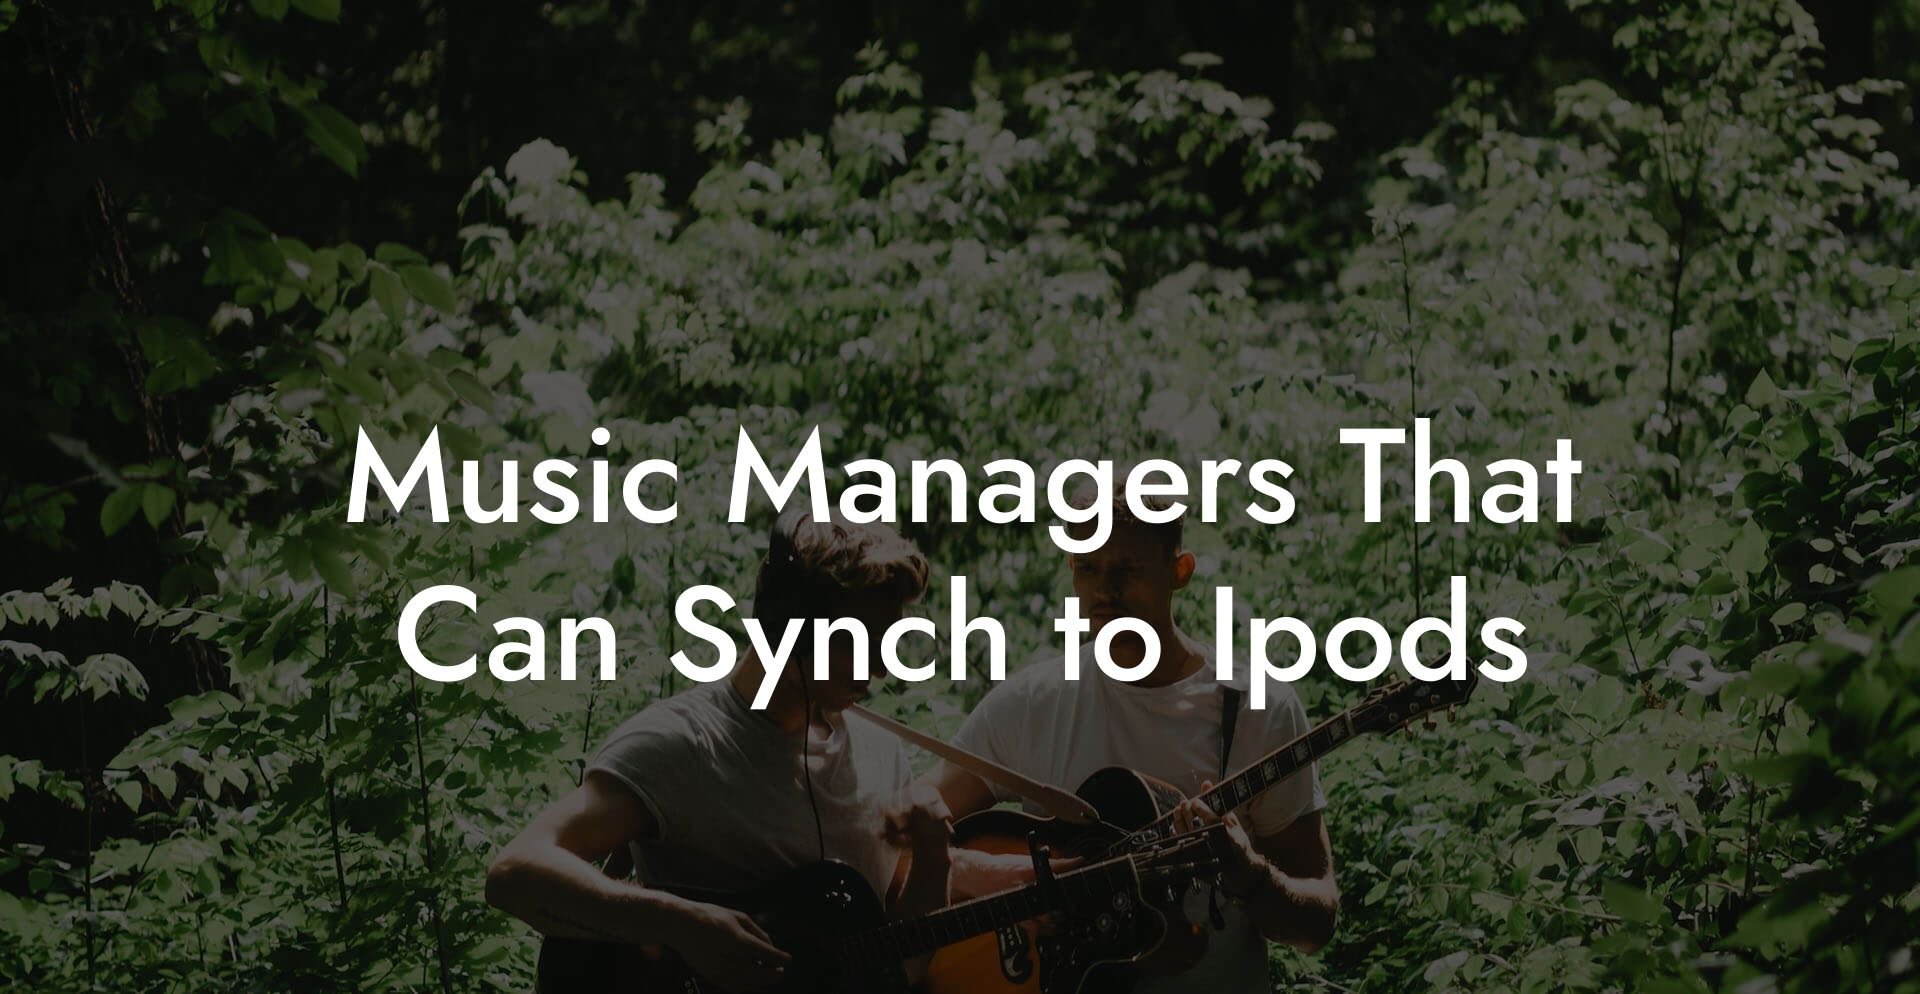 Music Managers That Can Synch to Ipods